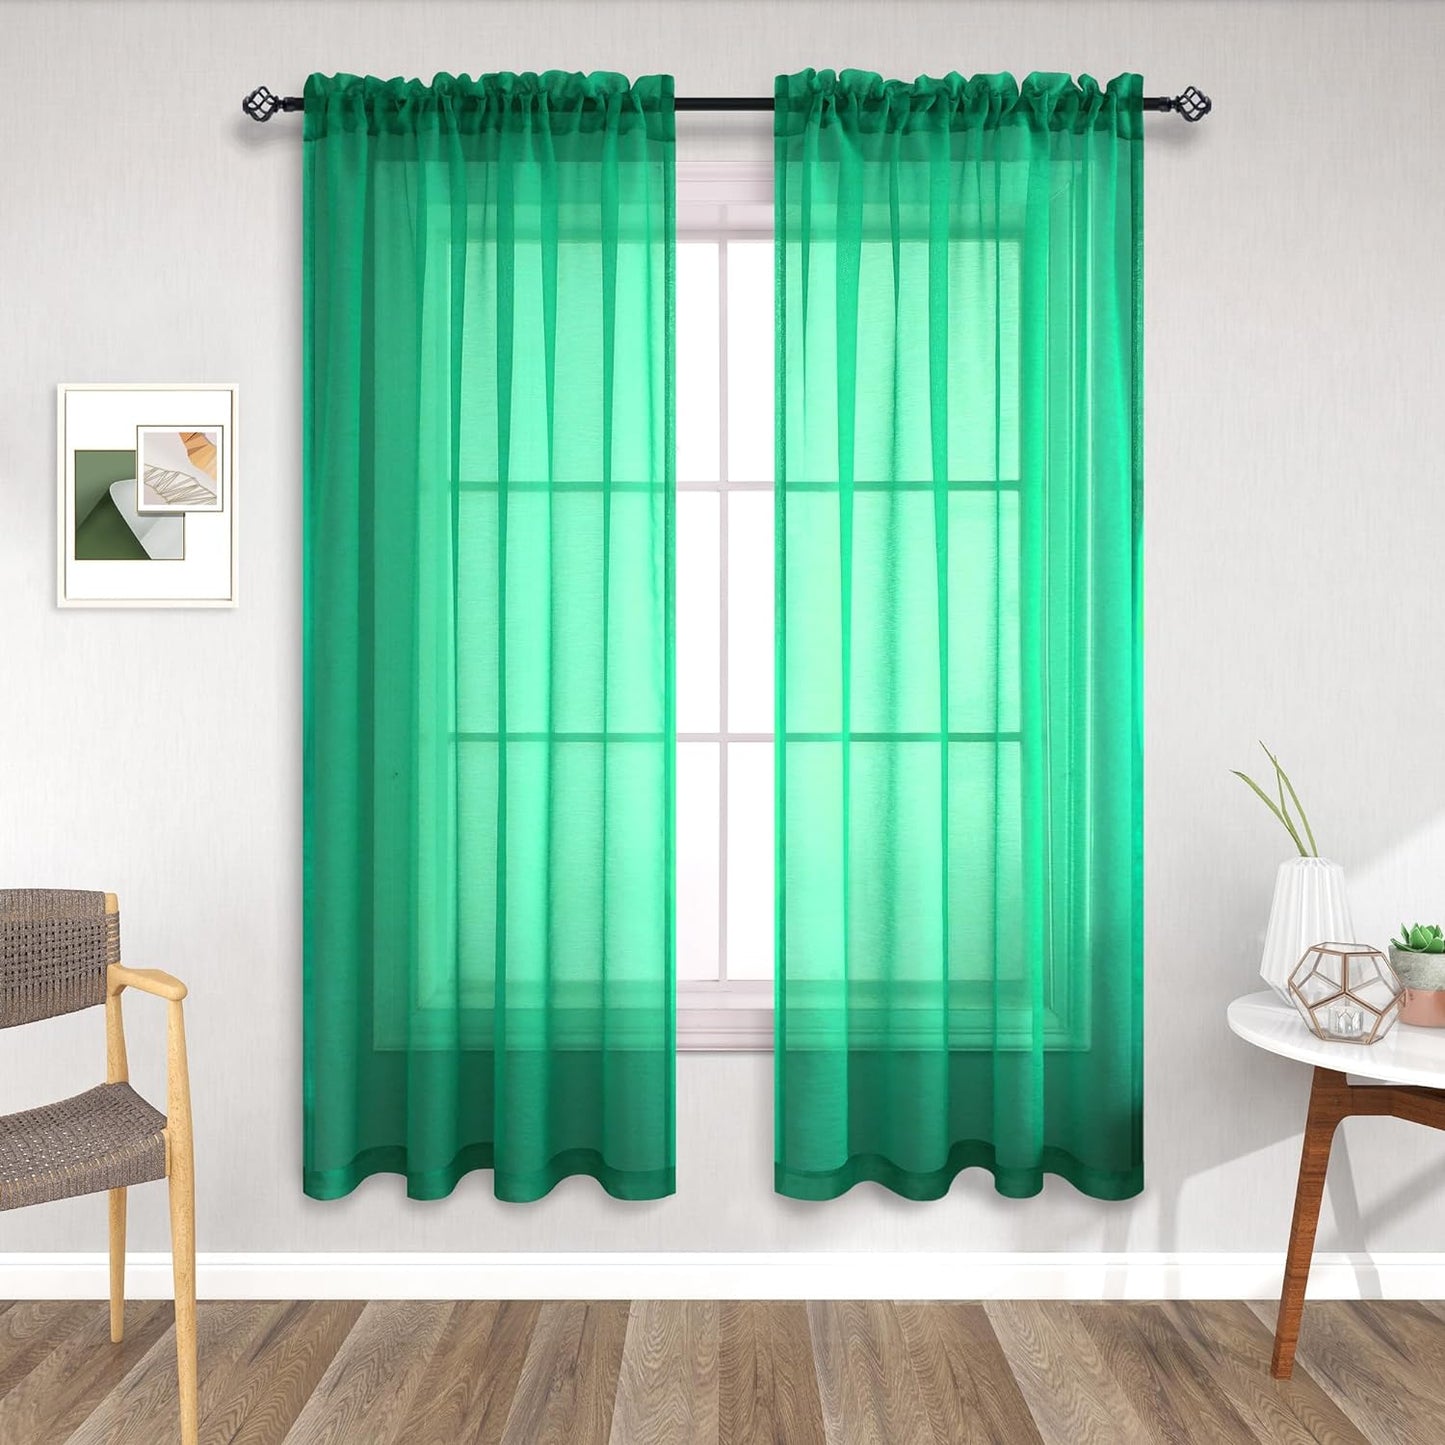 Terracotta Curtains 84 Inch Length for Living Room 2 Panel Sets Rod Pocket Sheer Curtains for Living Room Rust Burnt Orange Red  PITALK TEXTILE Green 52X63 